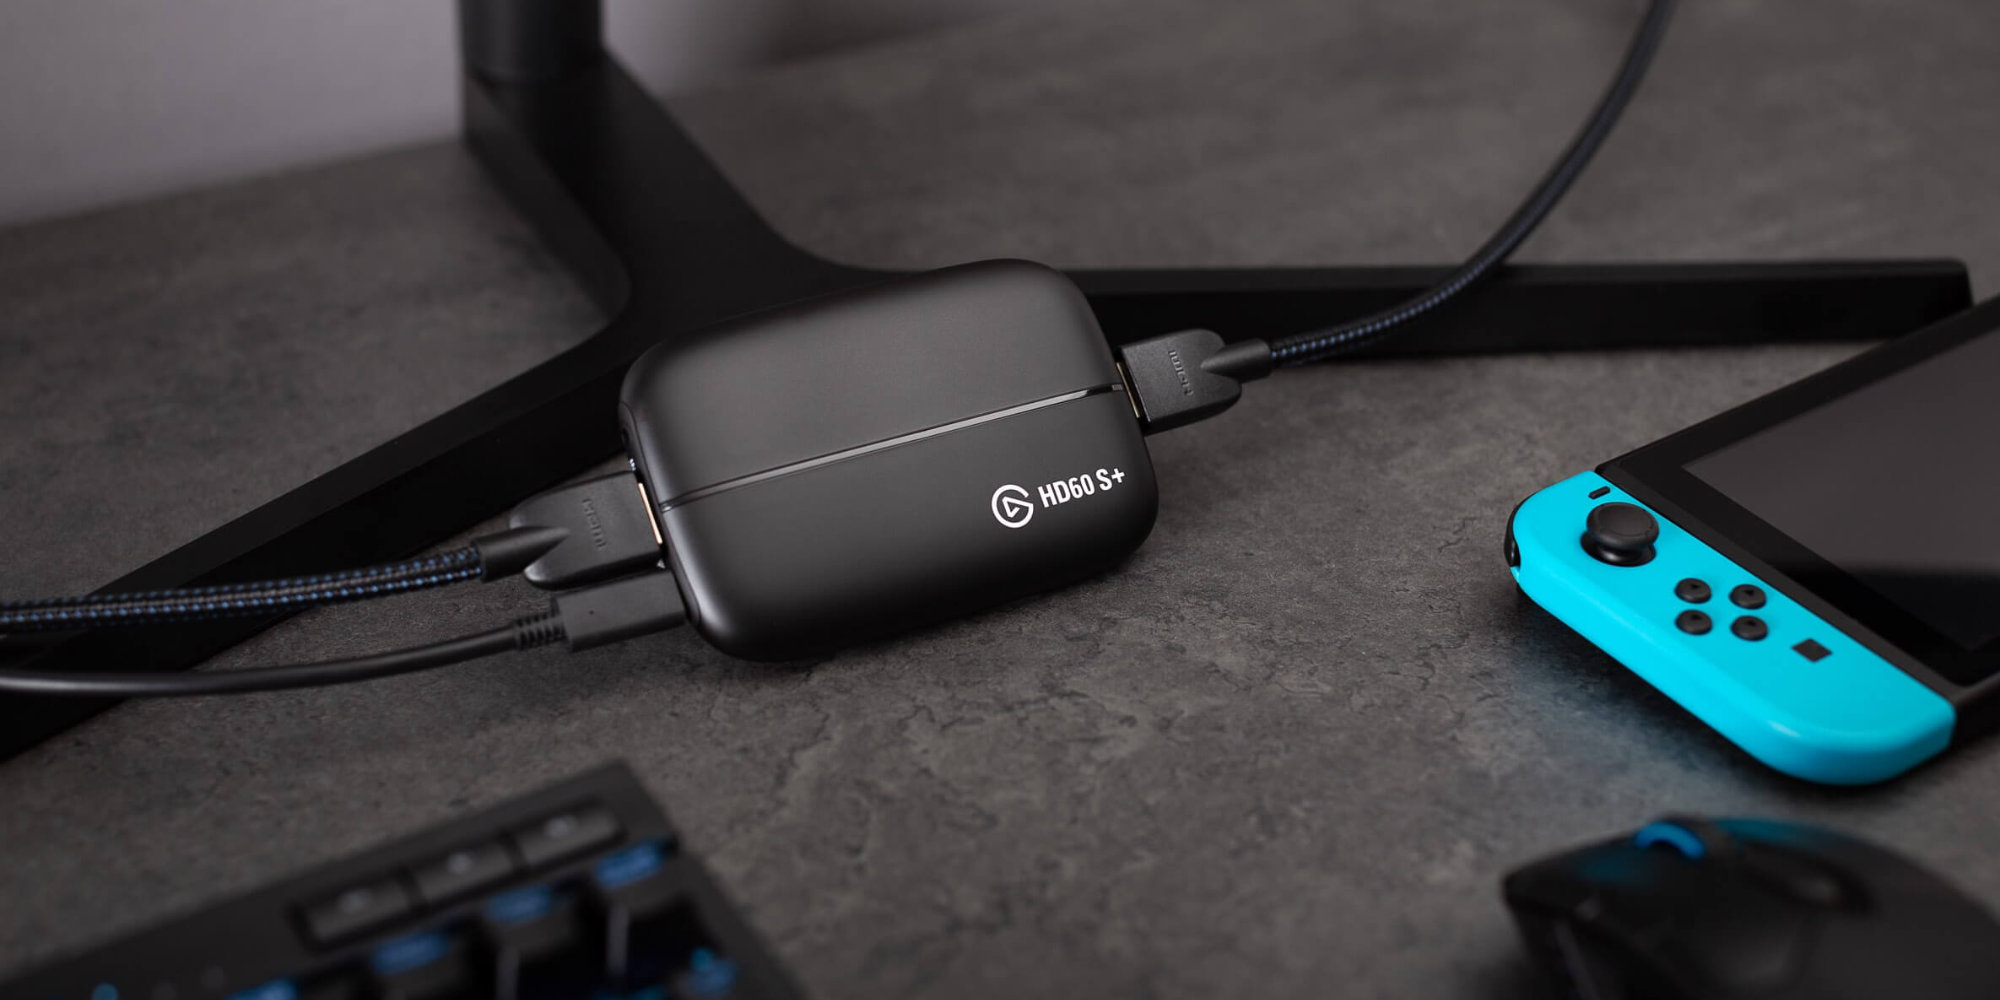 Elgato HD60 S+ 4K60 Capture Card with HDR10 sees second-best price